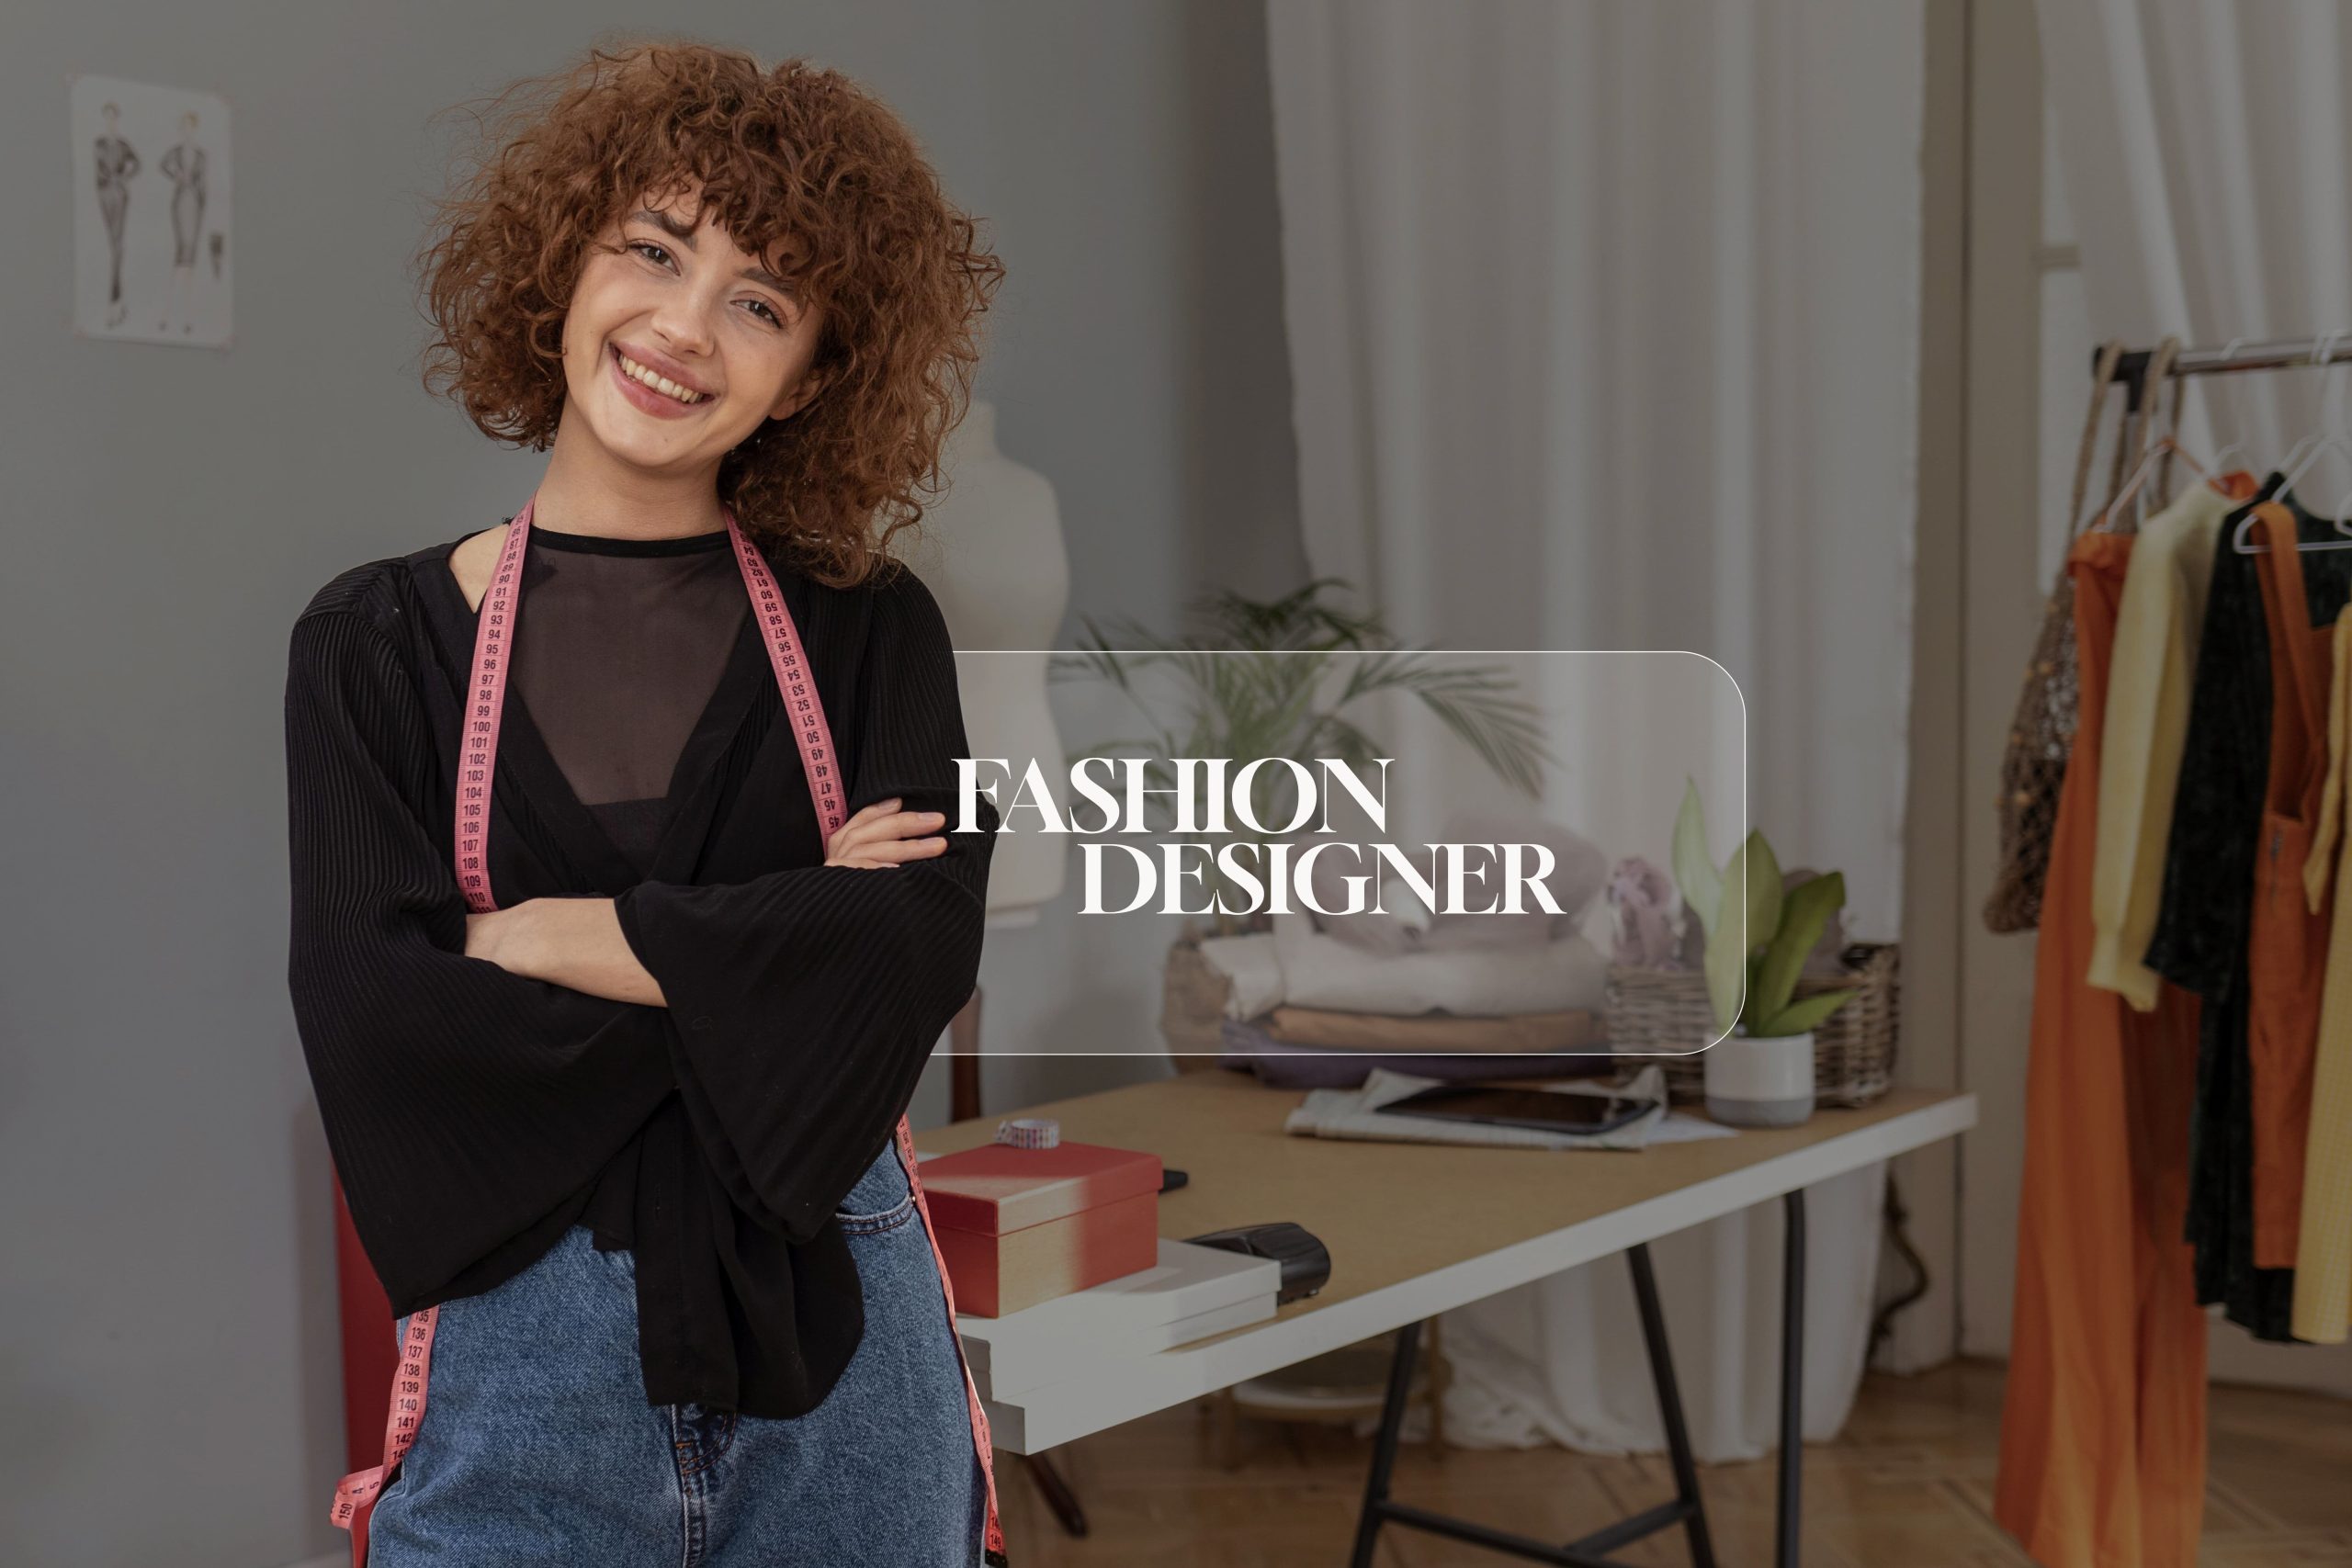 Why to choose fashion design as a career